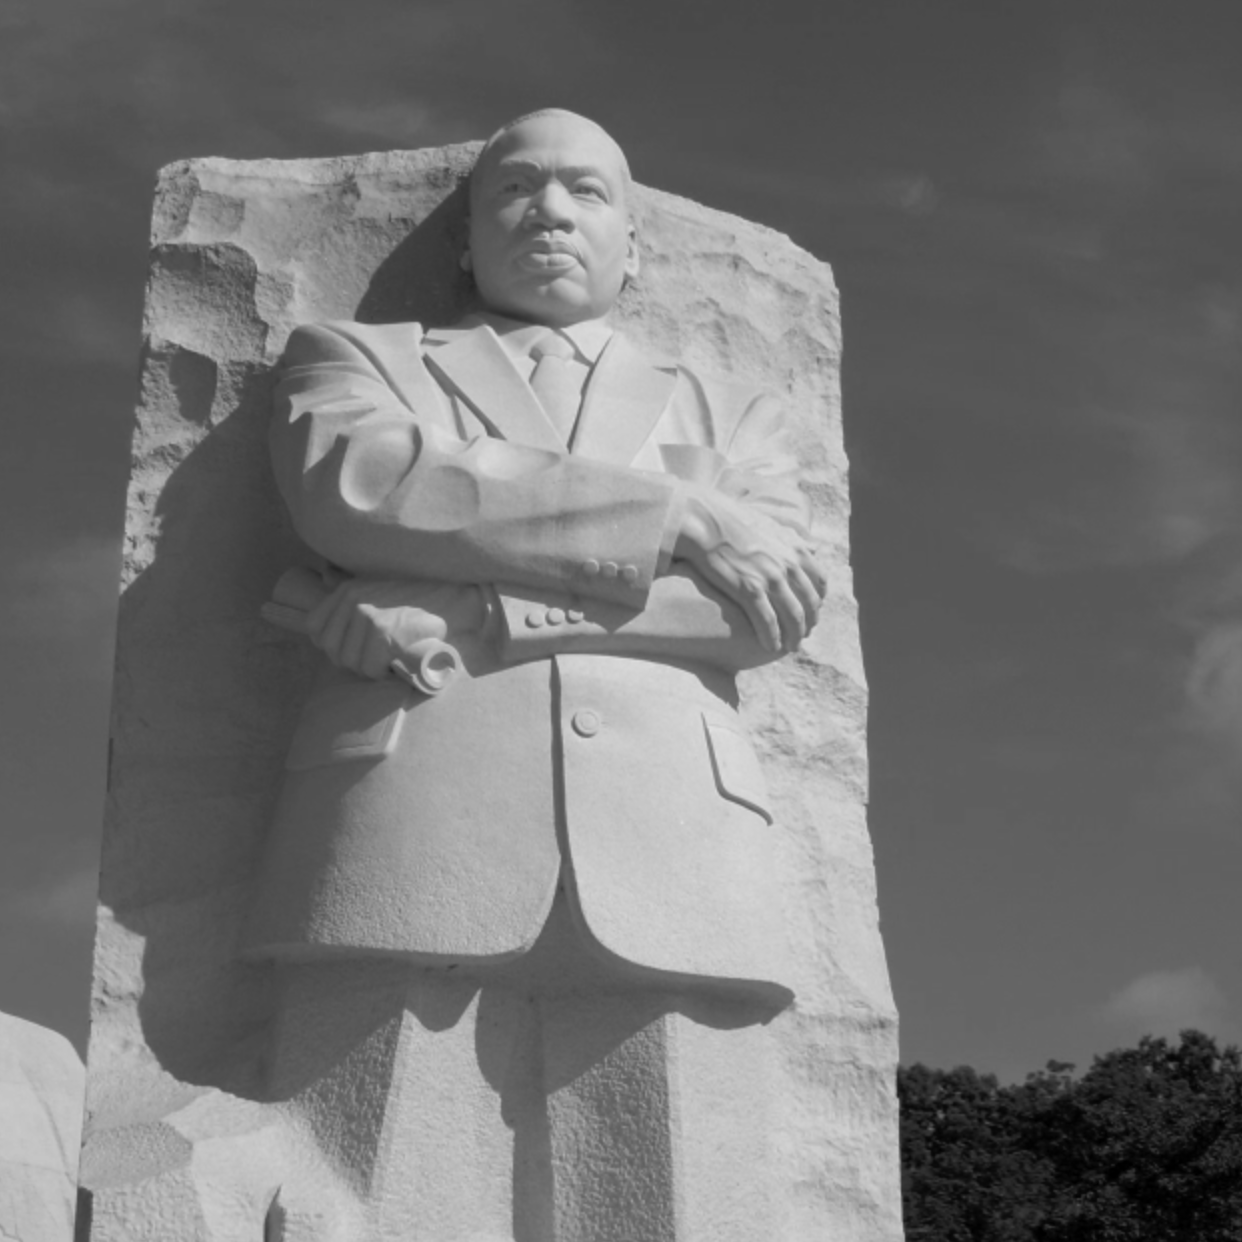 Art Direction, Video Editing & Animation for #MLKDay